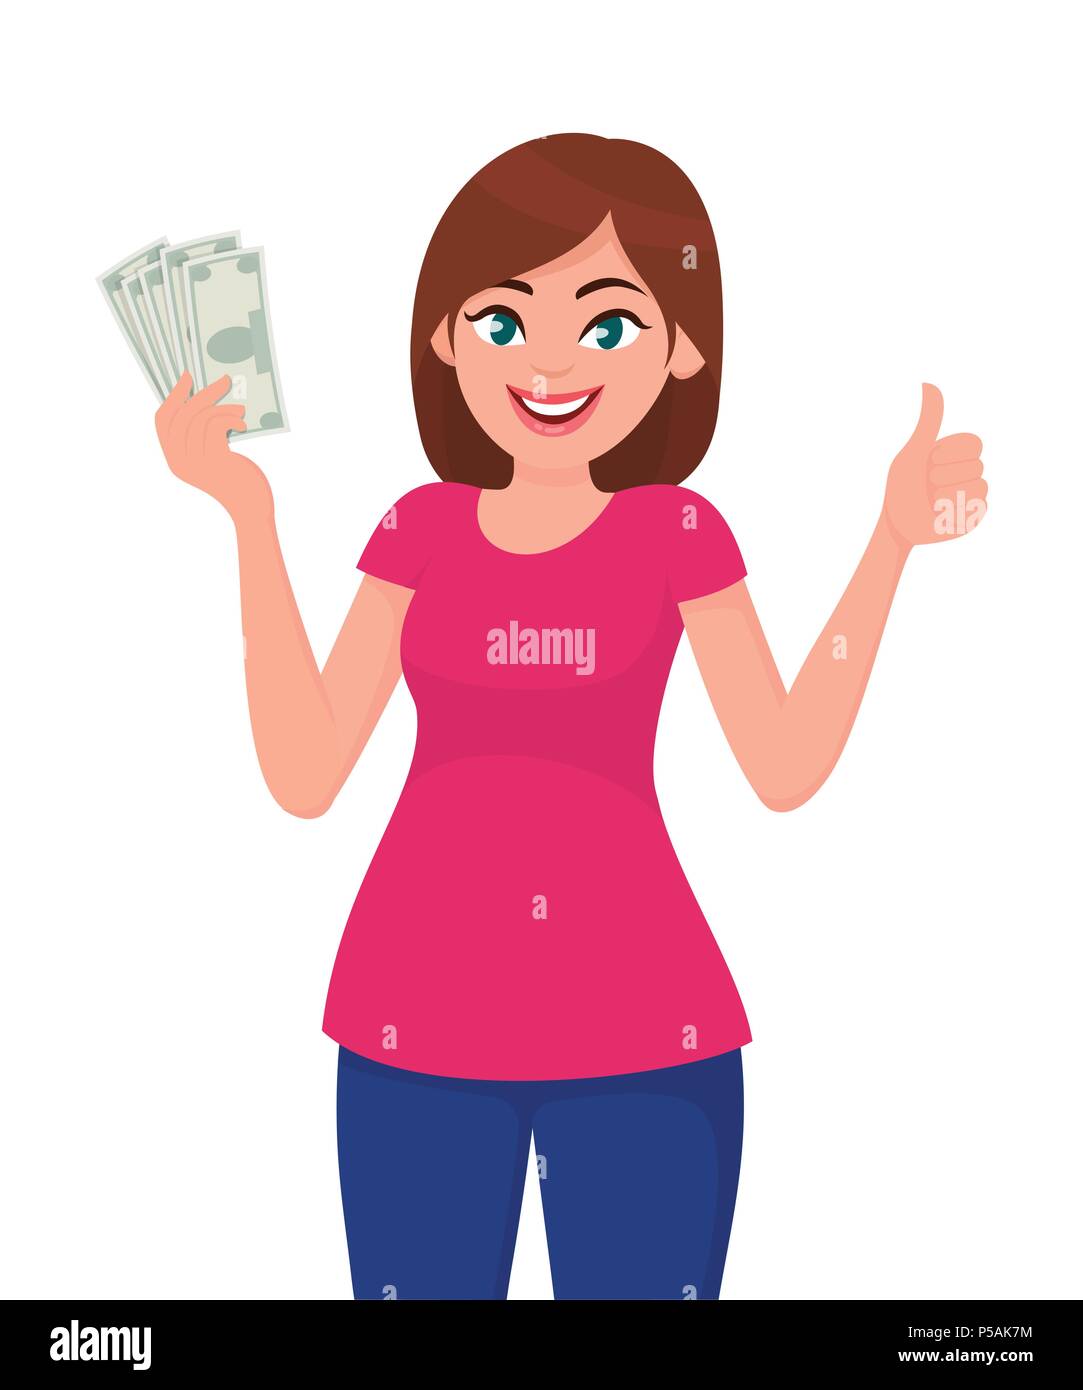 Young woman holding cash/currency/money in hand and showing thumbs up sign. Vector illustration in cartoon style. Stock Vector